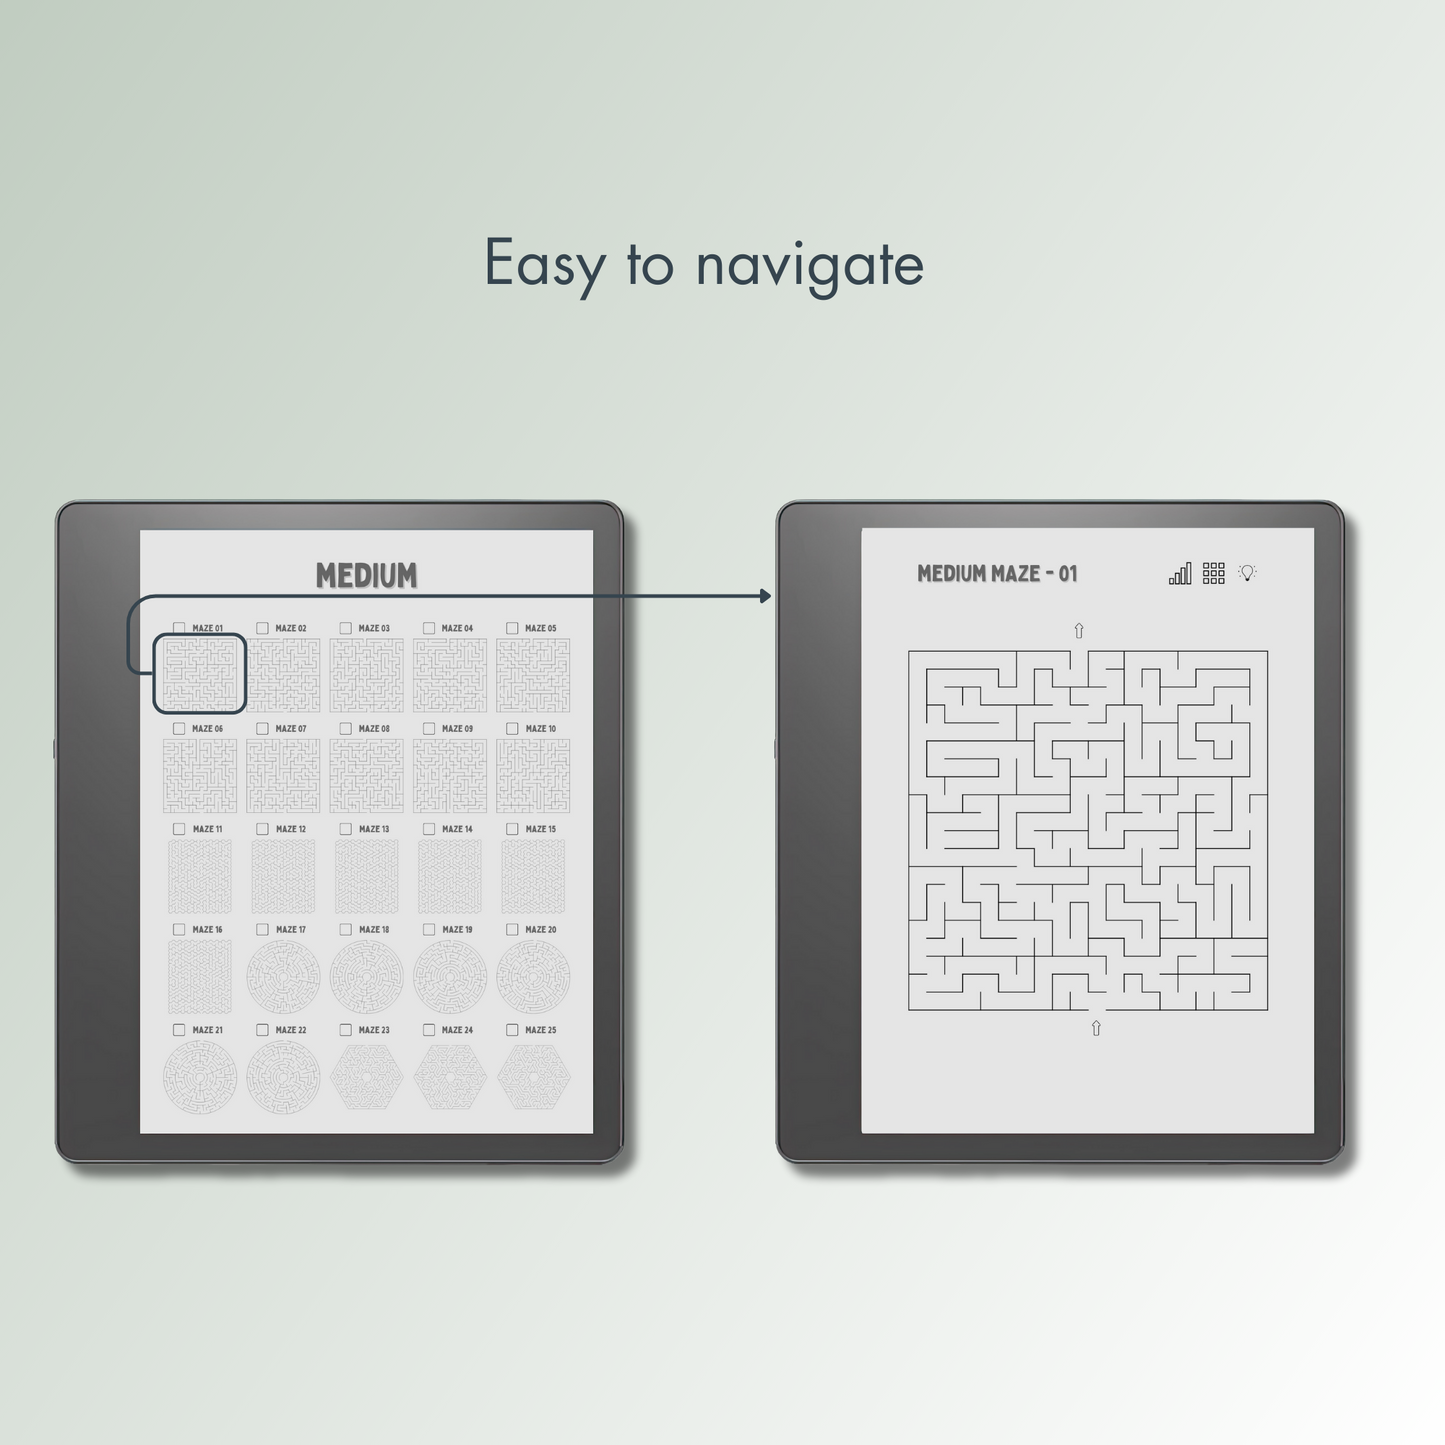 Kindle Scribe Maze Puzzles with easy navigations.